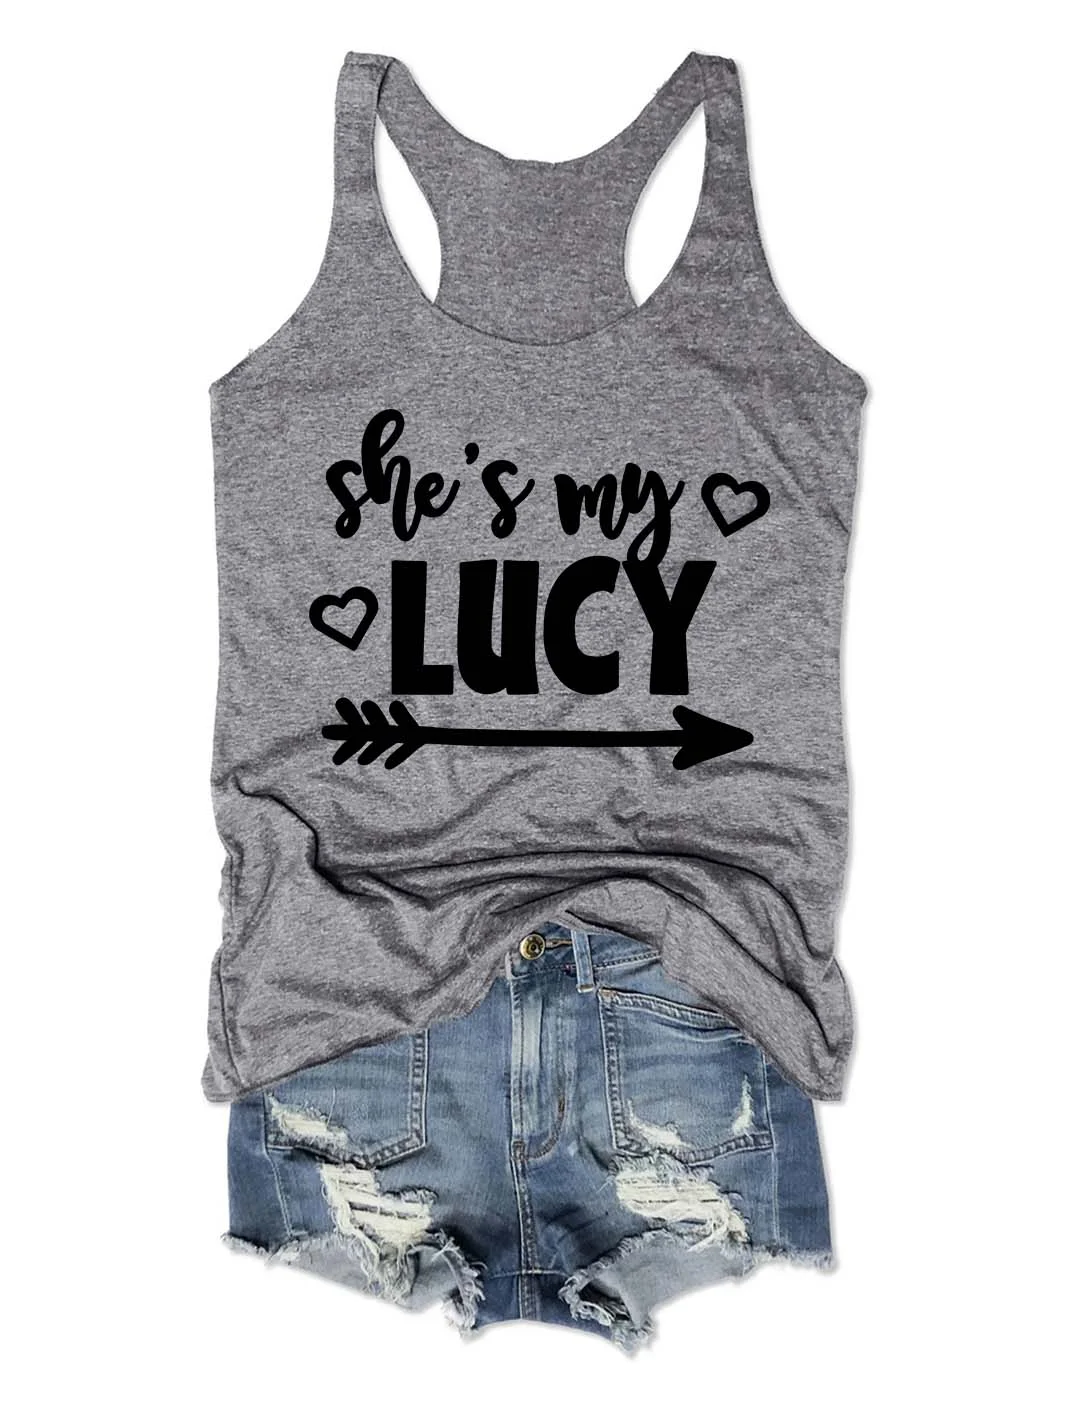 She's My Lucy/Ethel Matching Tank